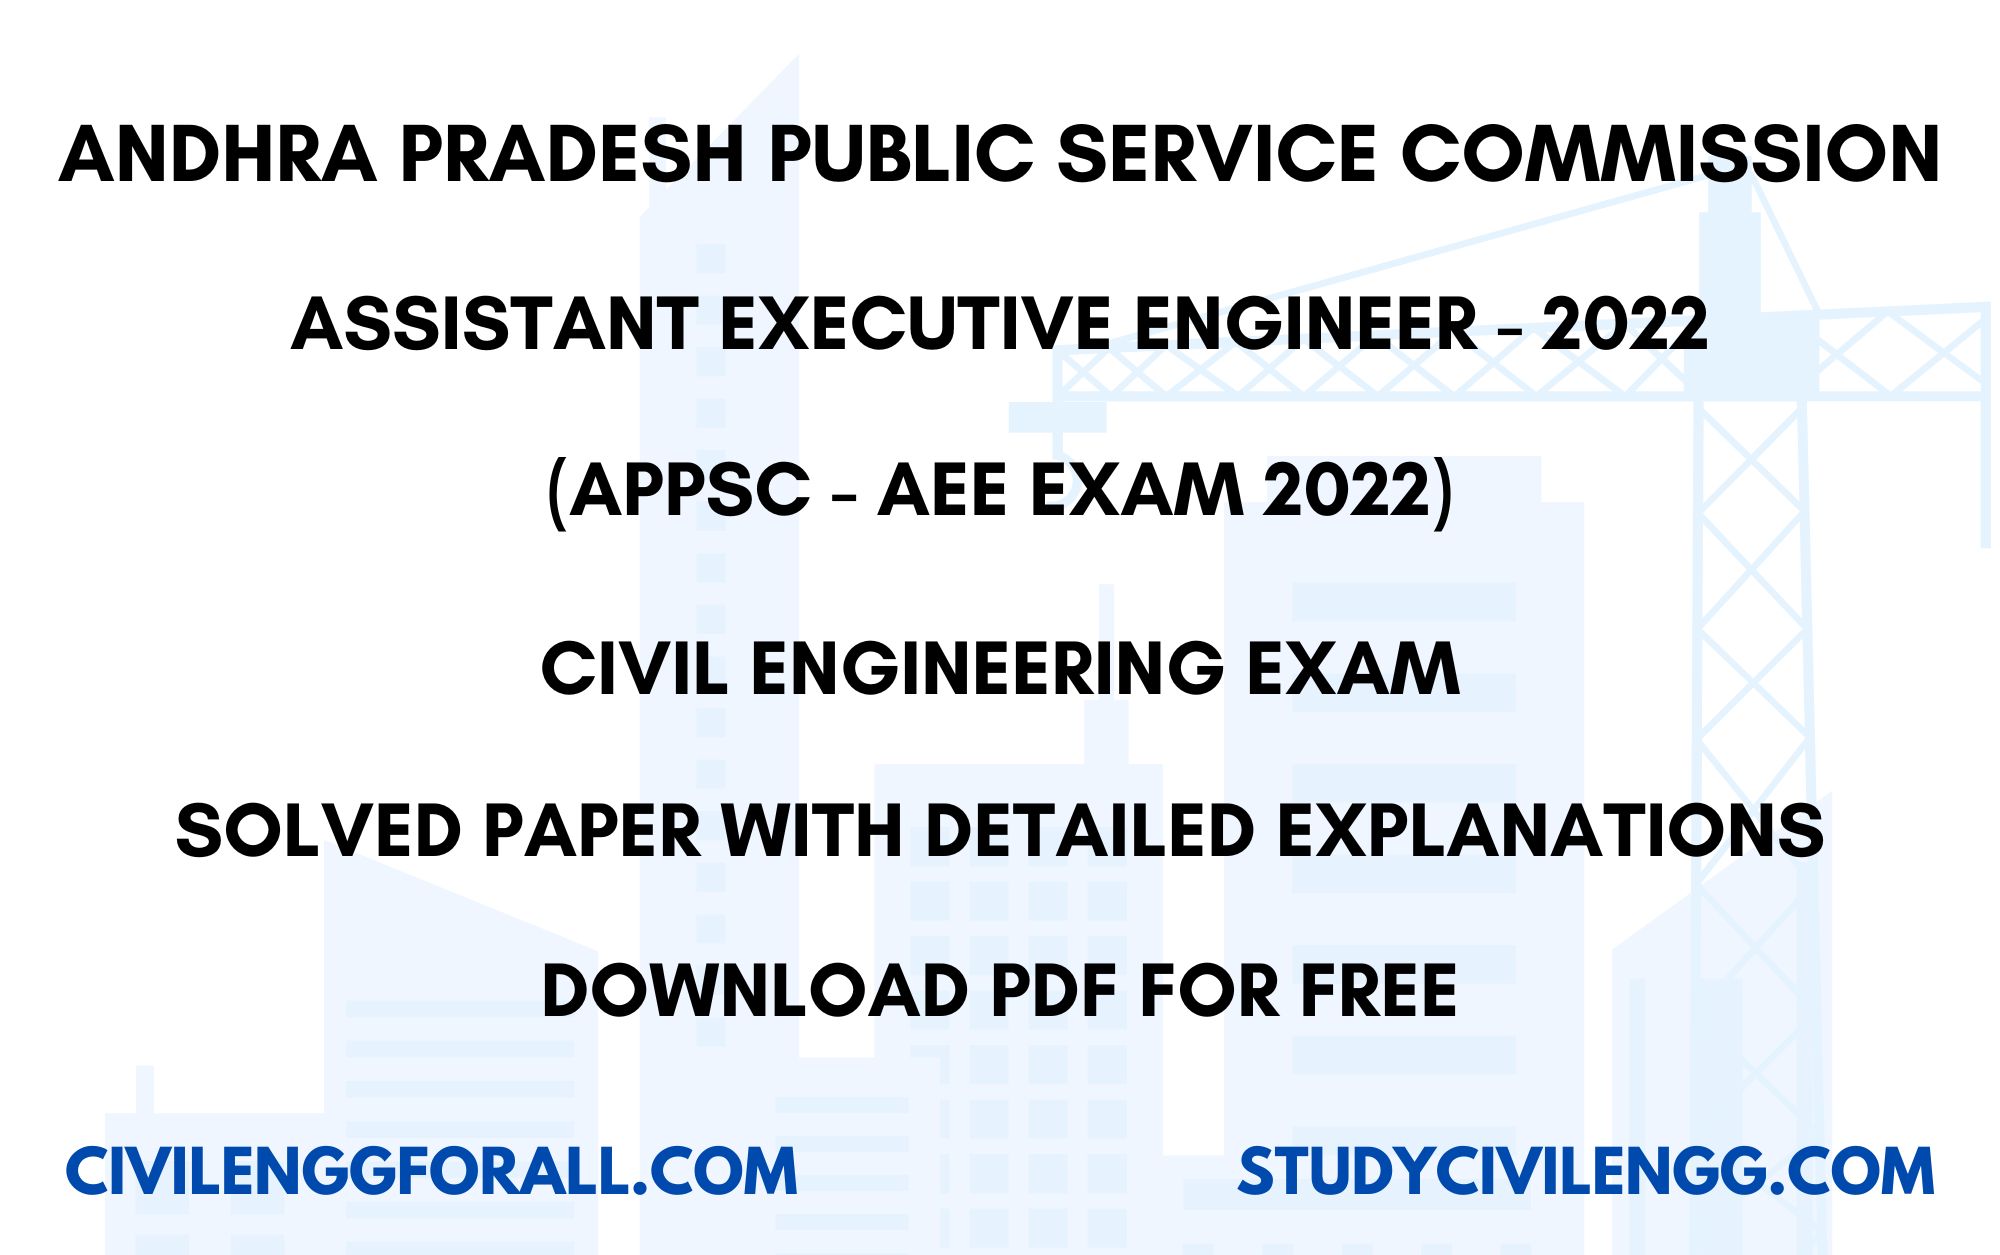 ANDHRA PRADESH PUBLIC SERVICE COMMISSION - ASSISTANT EXECUTIVE ENGINEER - CIVIL ENGINEERING EXAM - APPSC AEE 2022 - SOLVED PAPER PDF